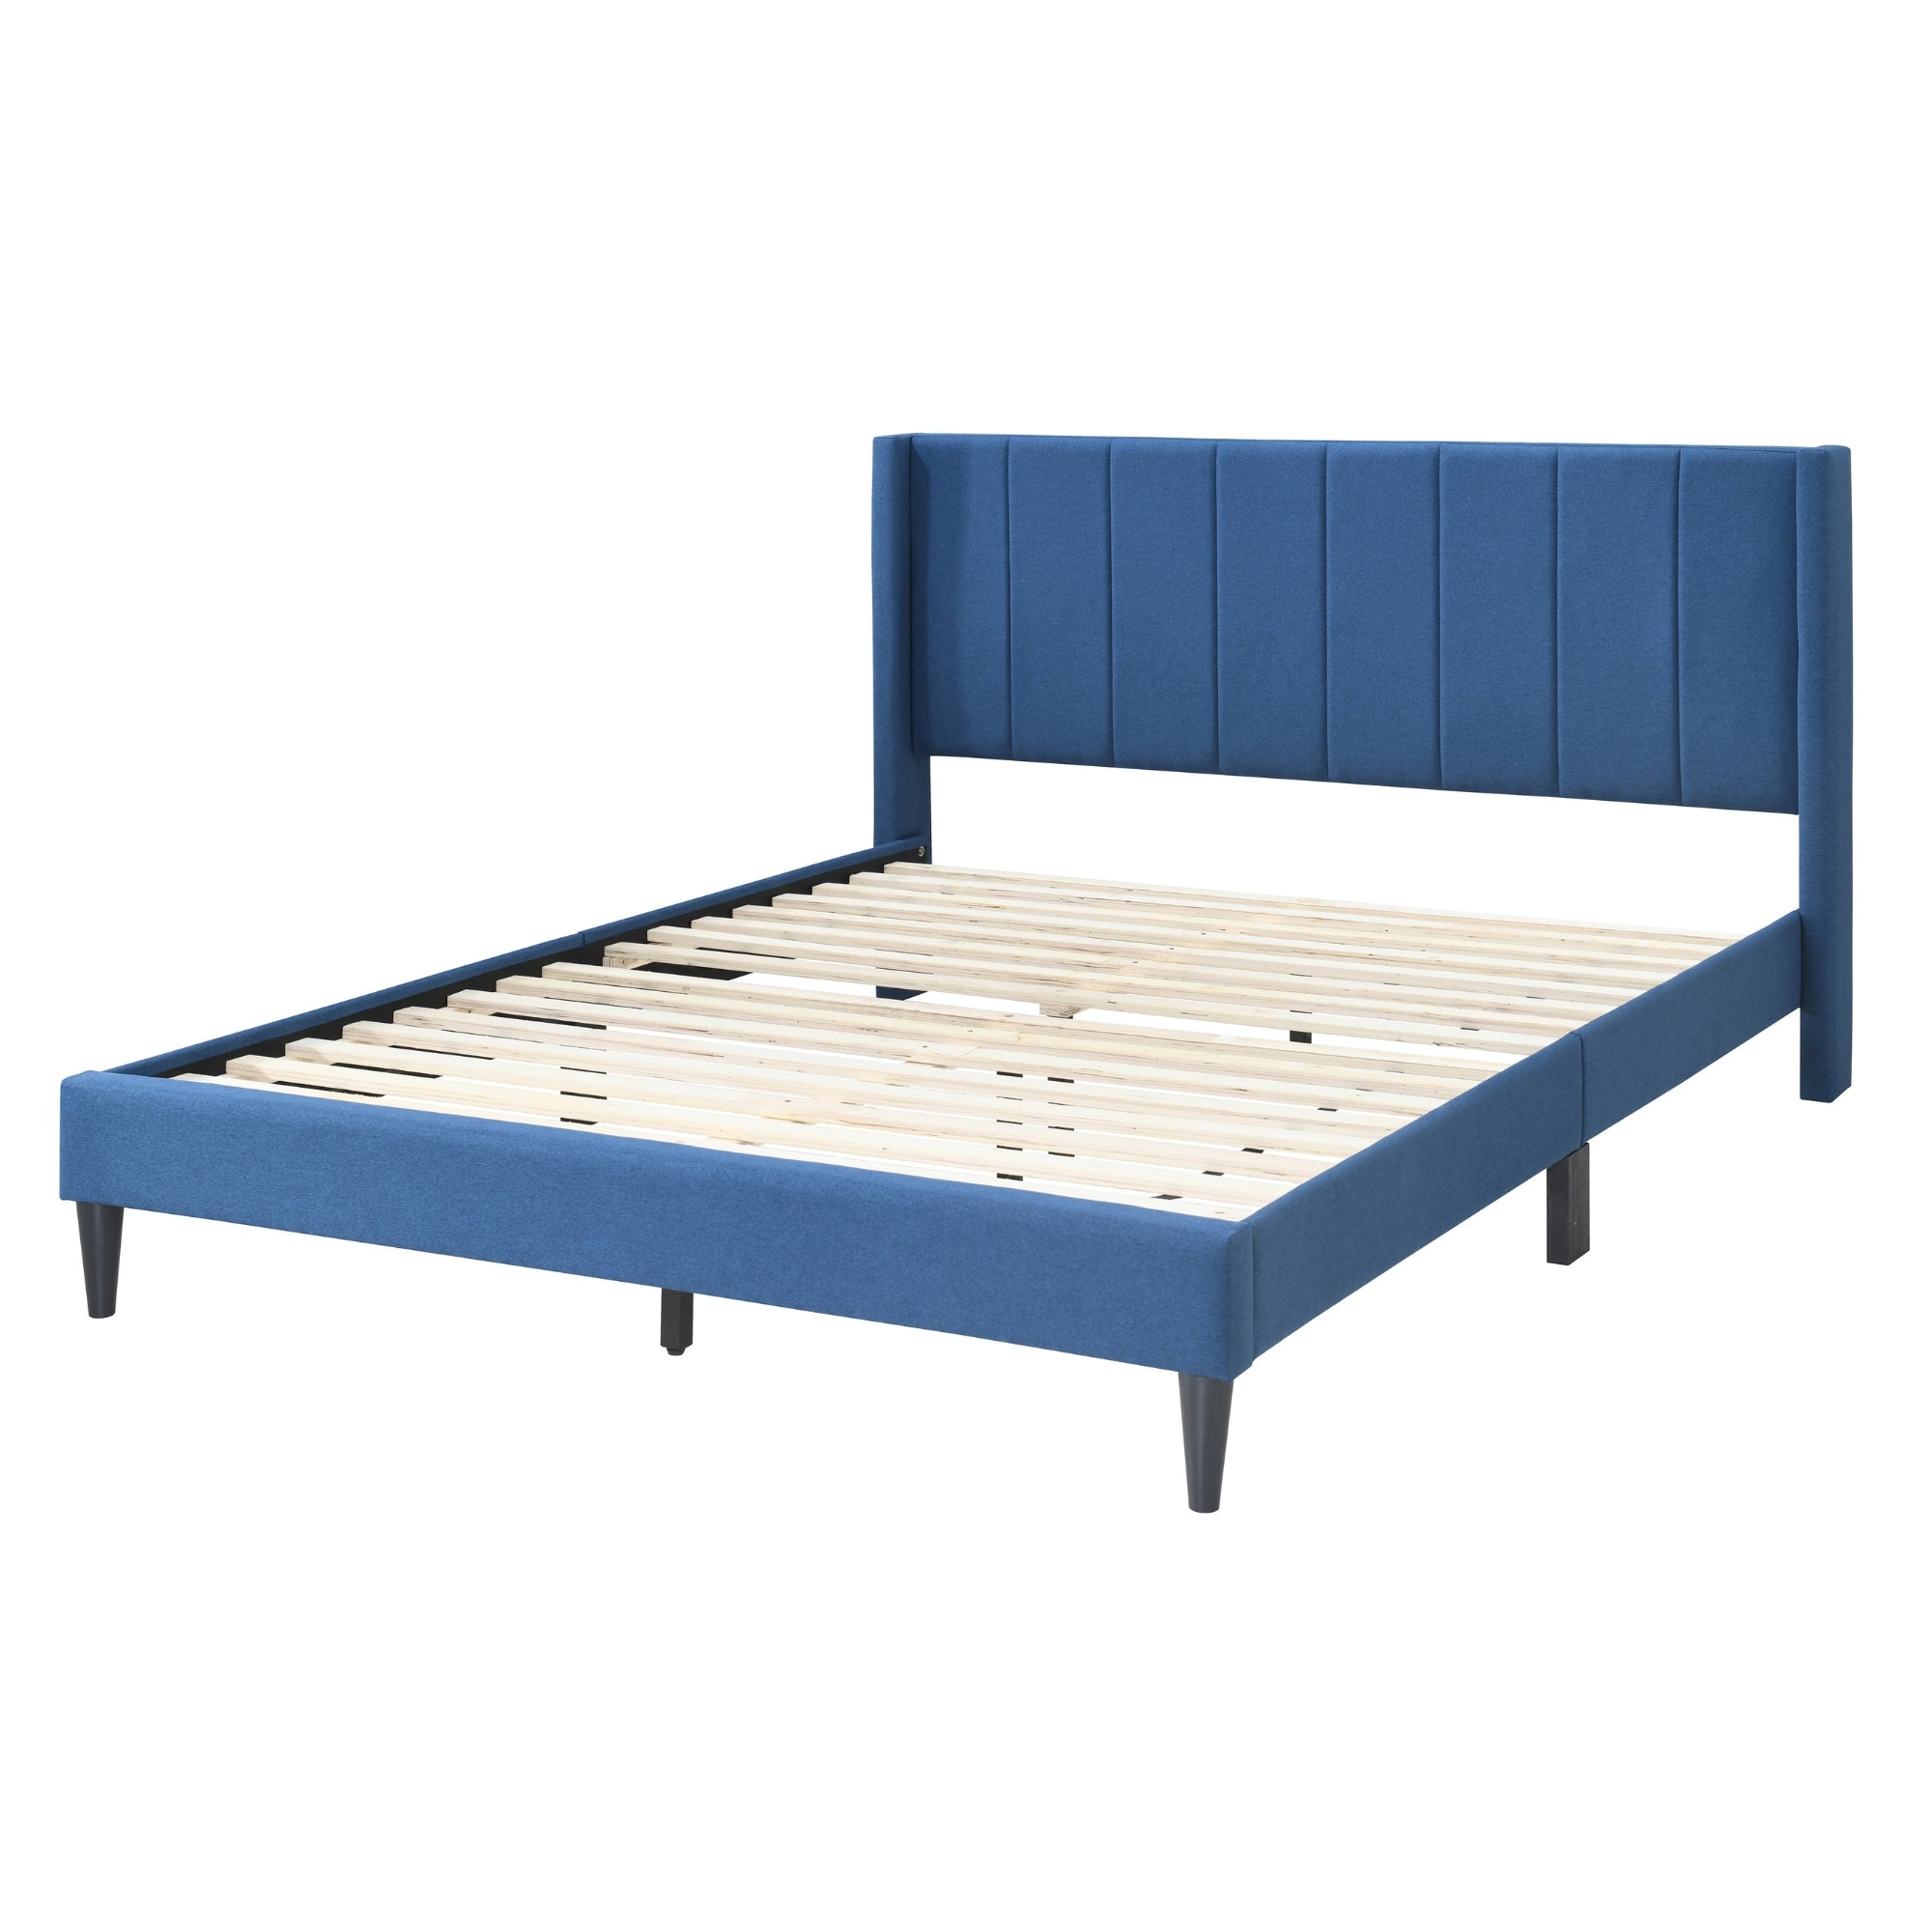 Plush Blue King Bed with Winged Headboard and MDF Wood